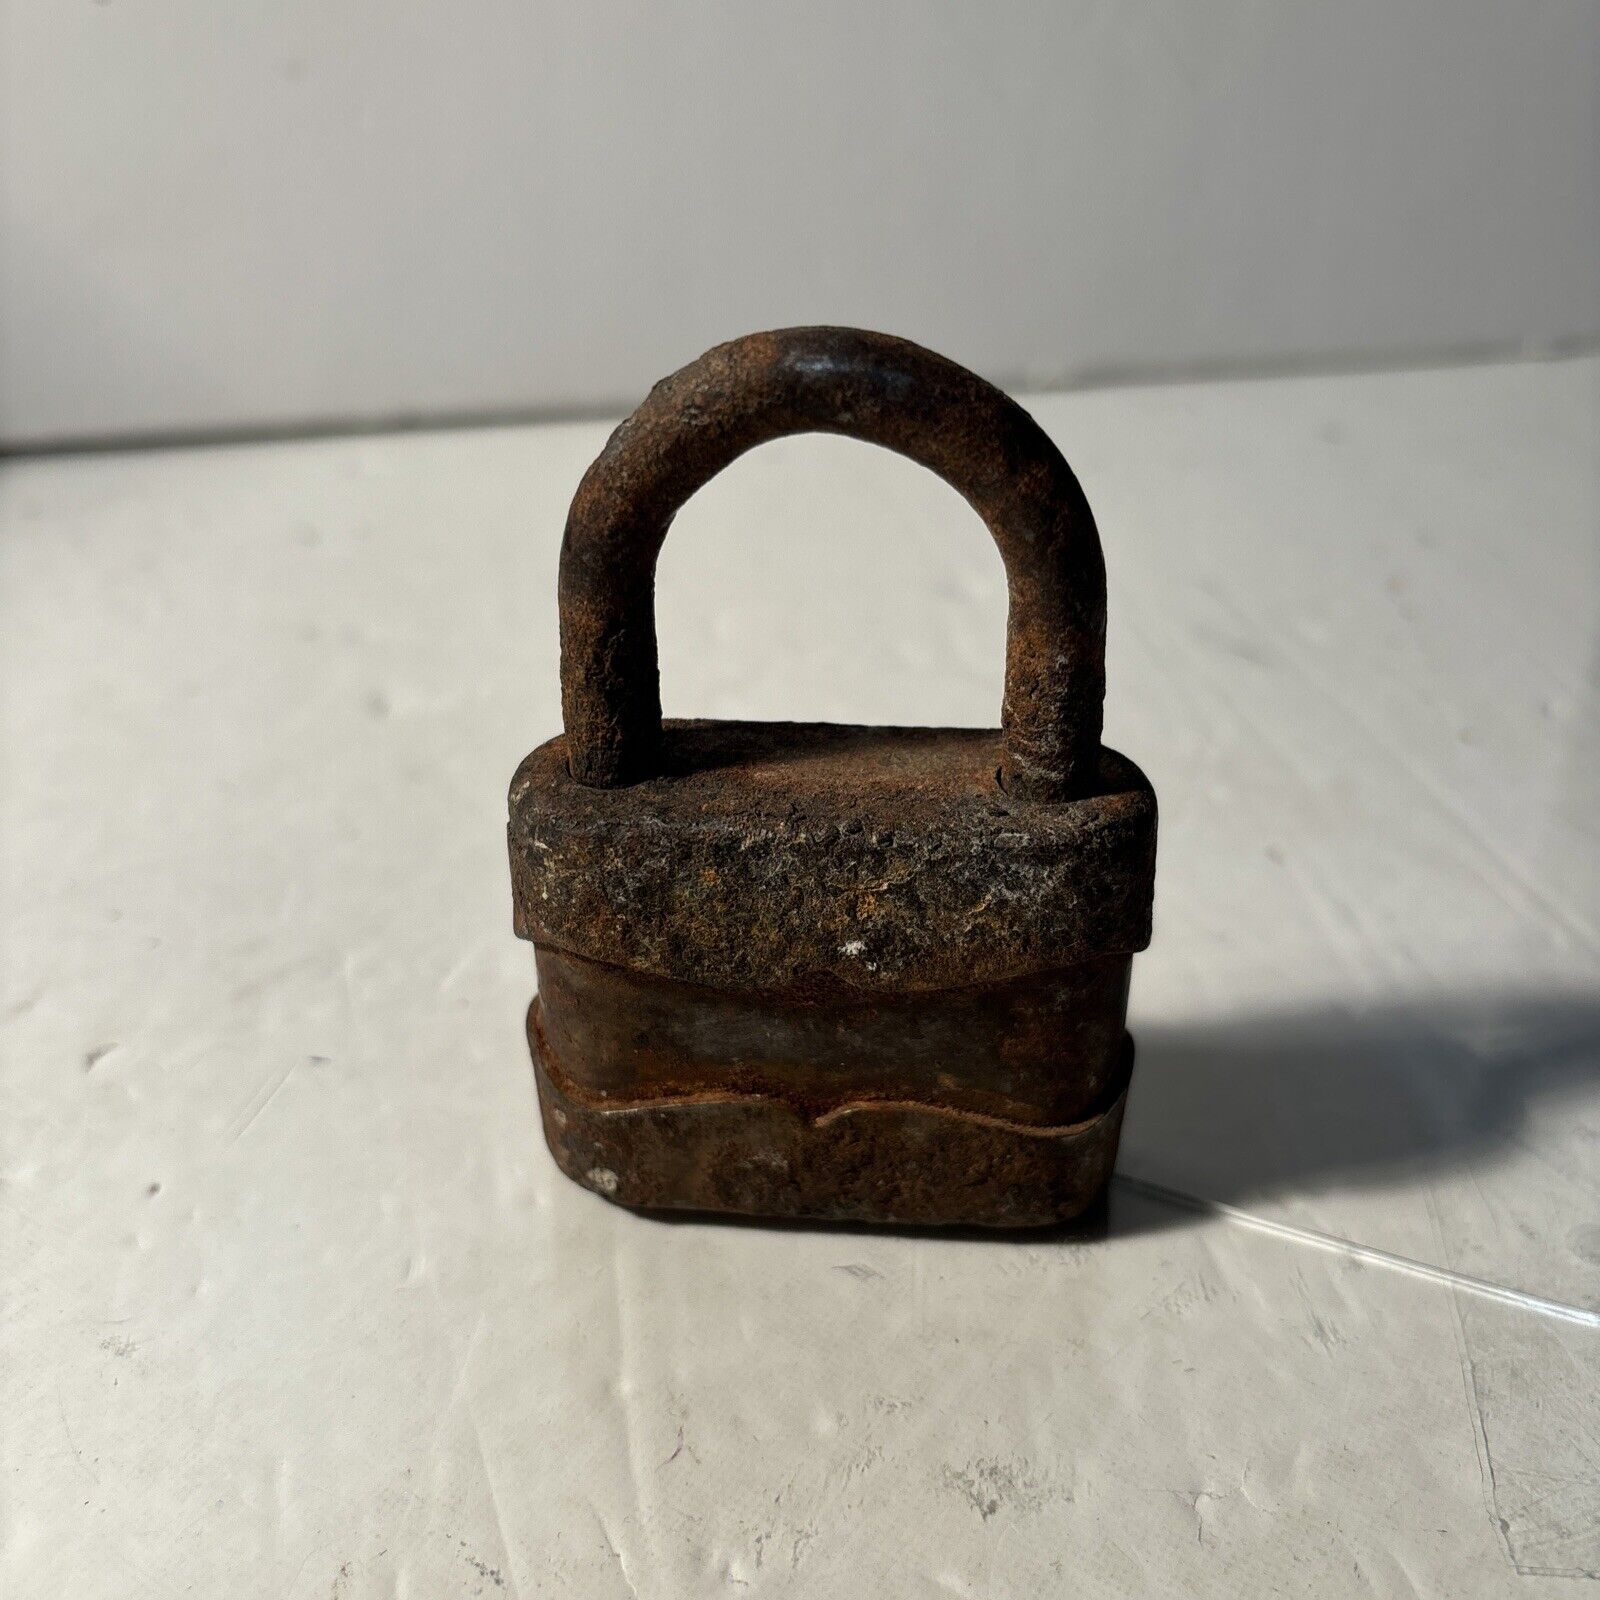 Antique Rustic Old German Iron Lock Rare Collectible Sold As Is